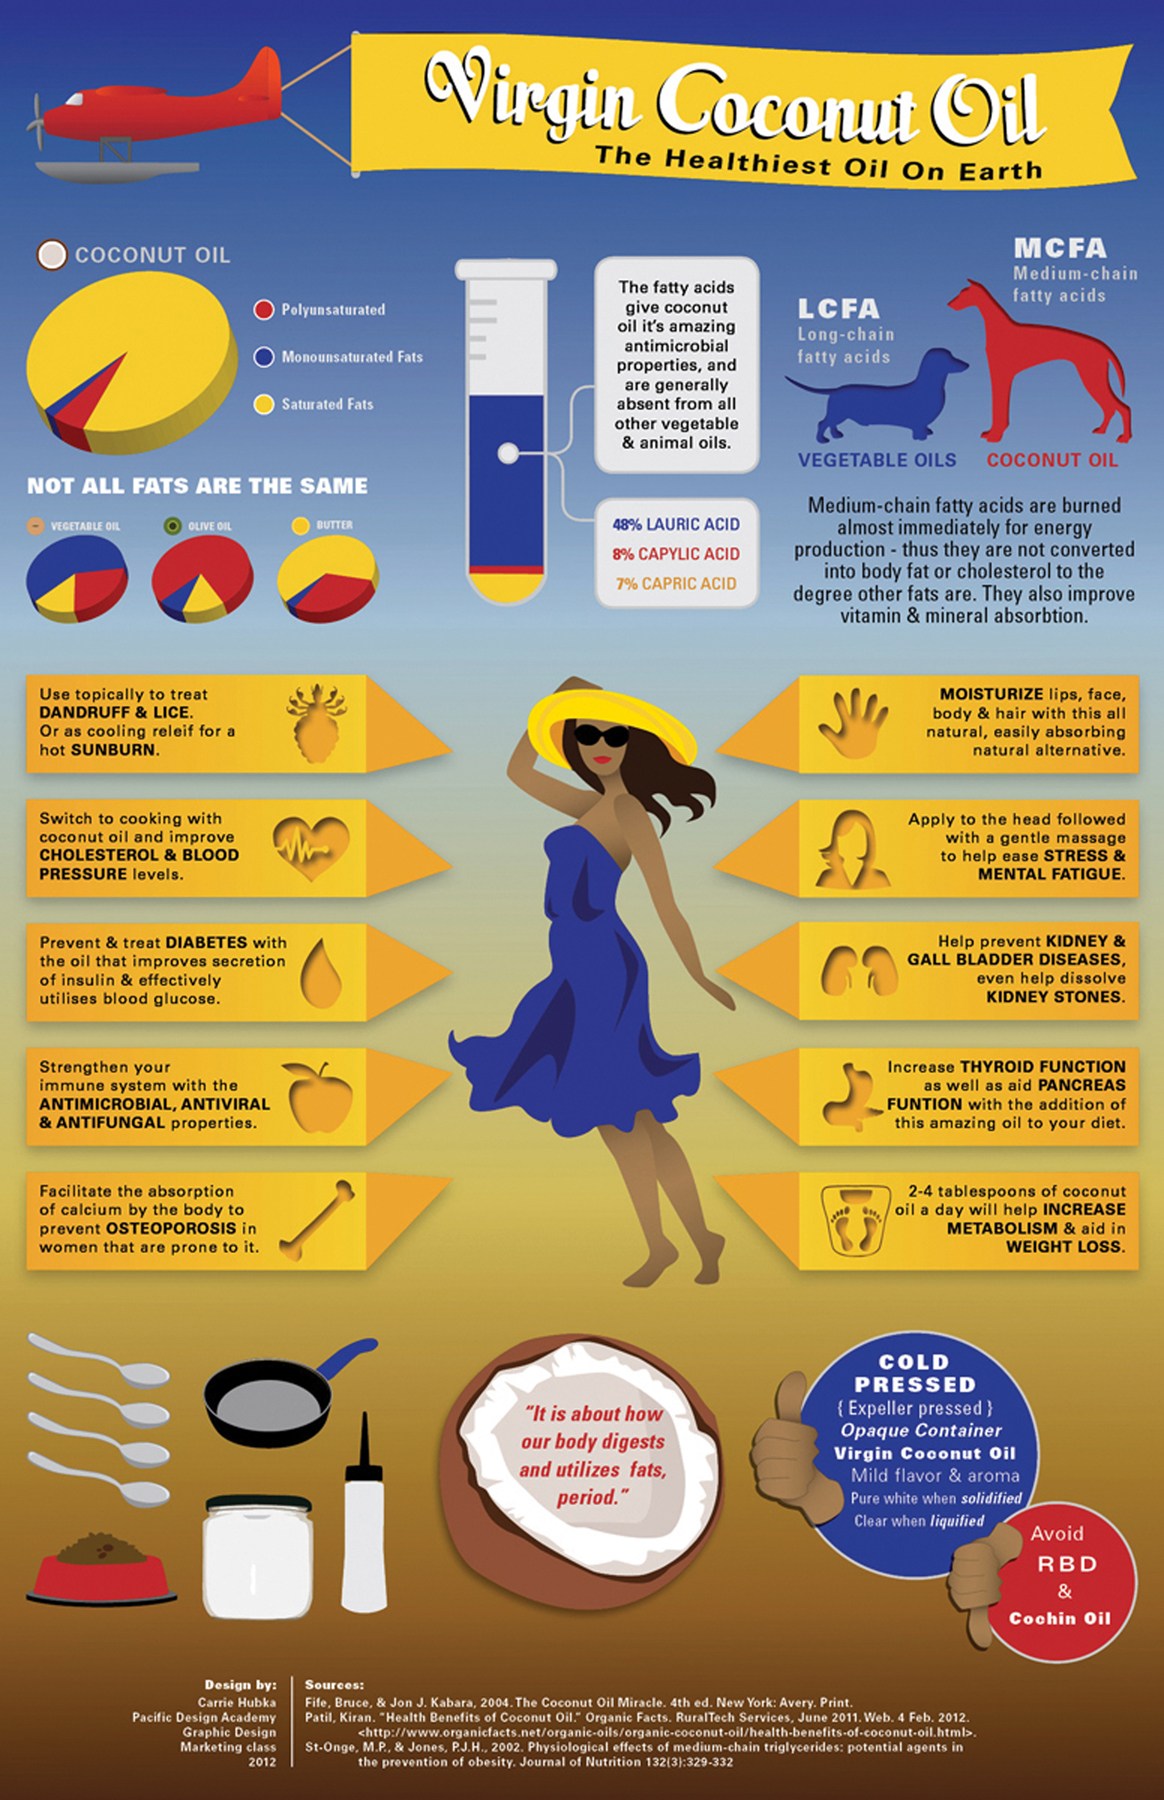 Why Virgin Coconut Oil is the Healthiest Oil on Earth - Infographic